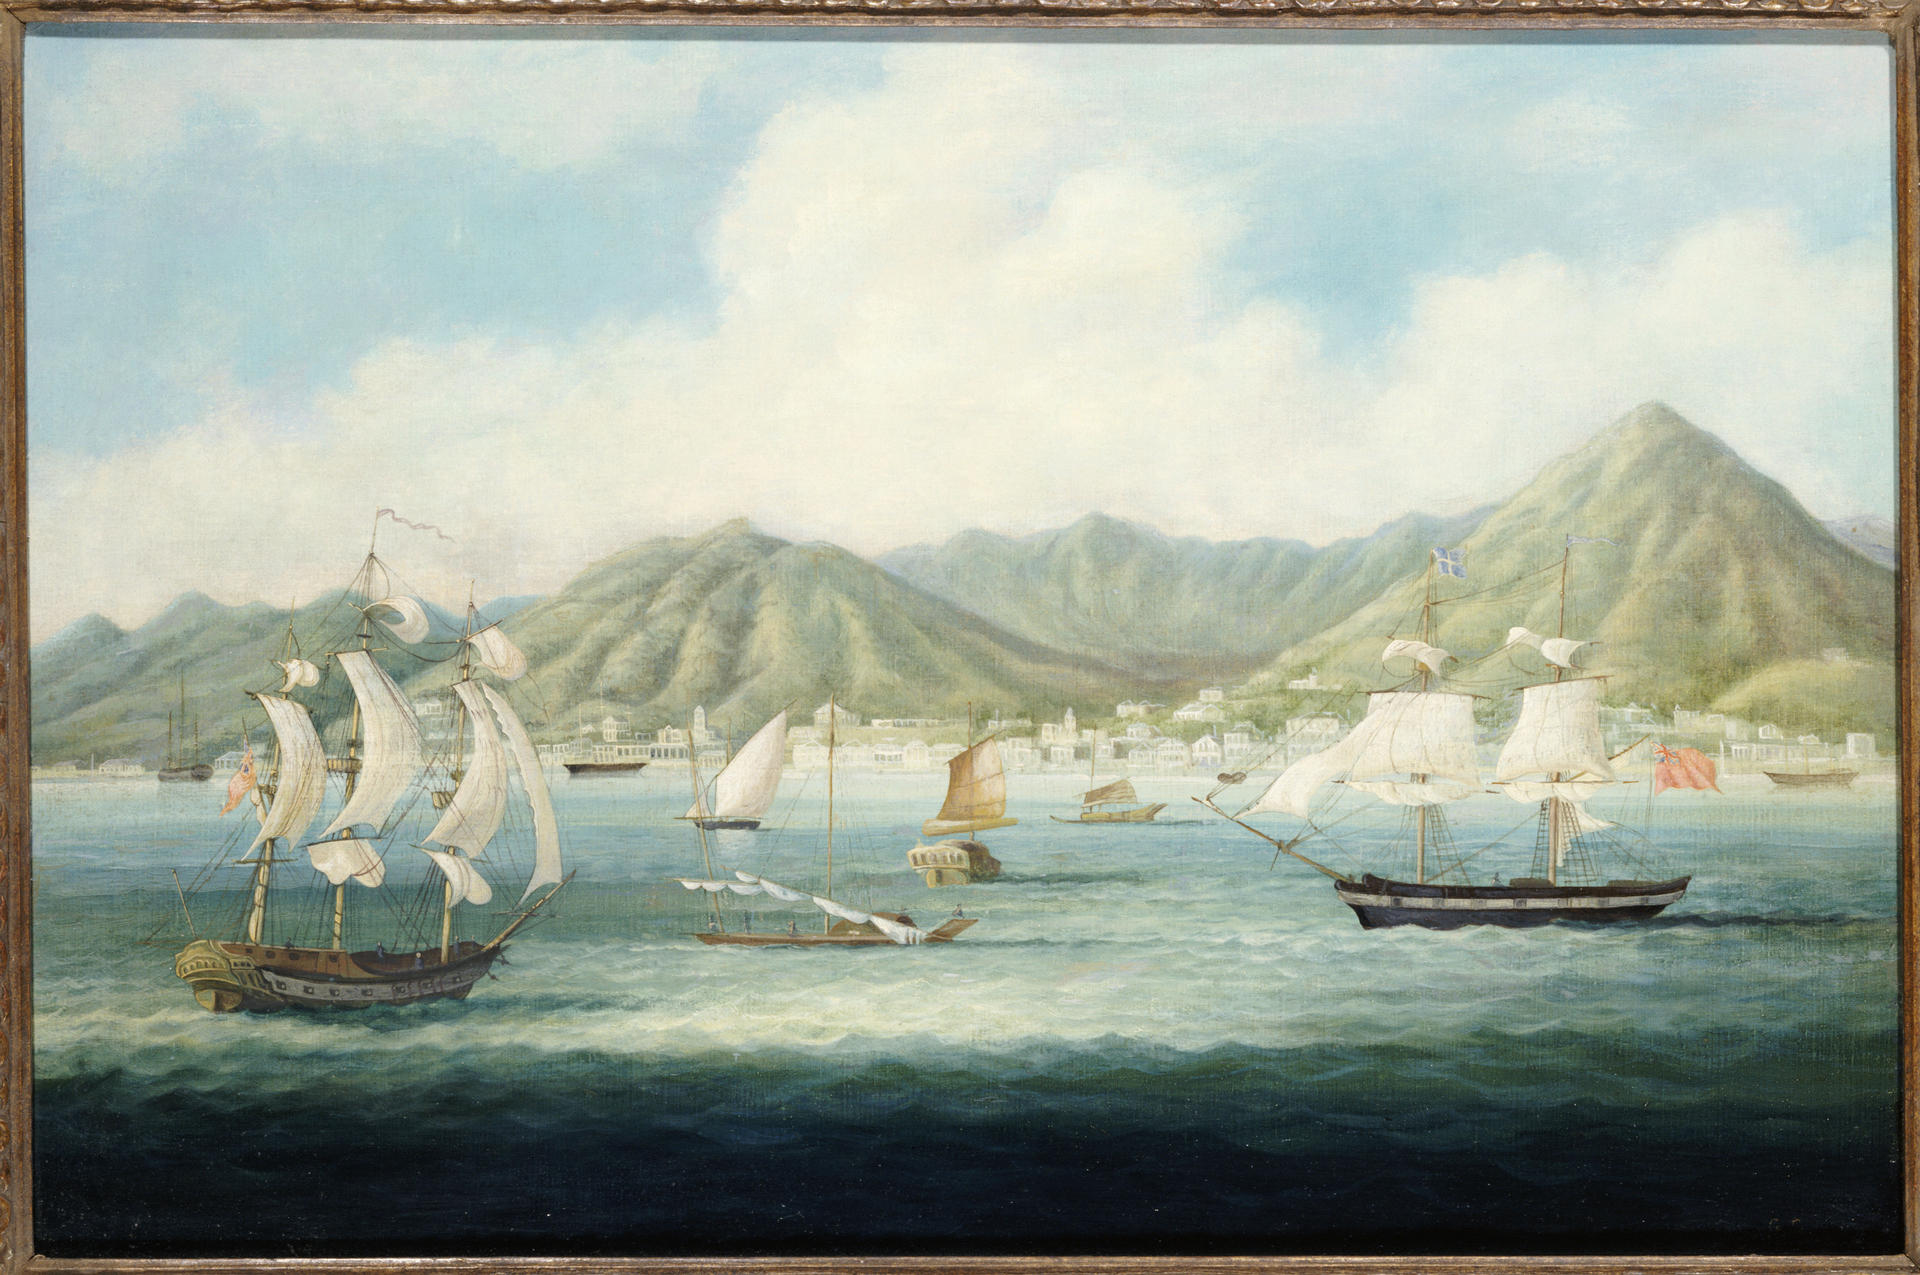 A view of Hong Kong harbour before John Bowring's time as governor.